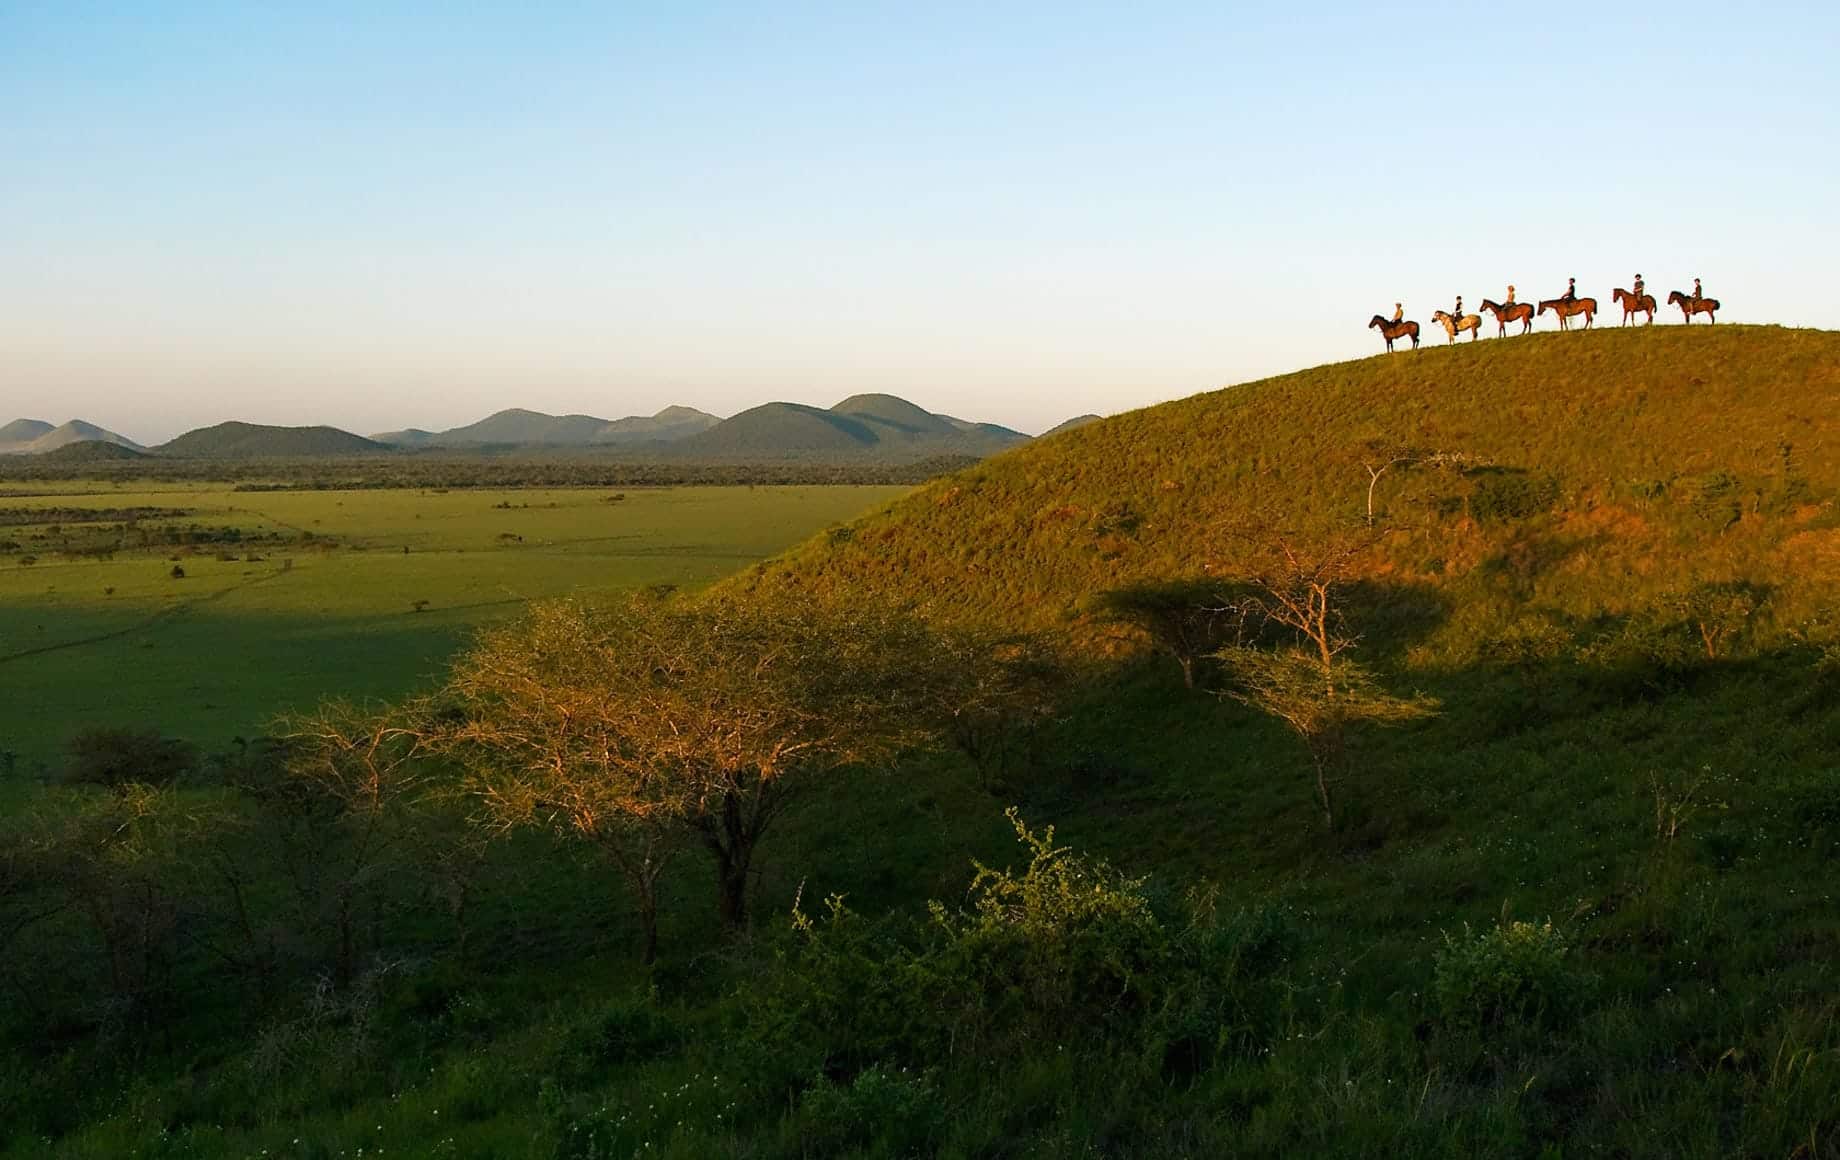 Horseback riding in the wild on a hill at Chyulu Hills